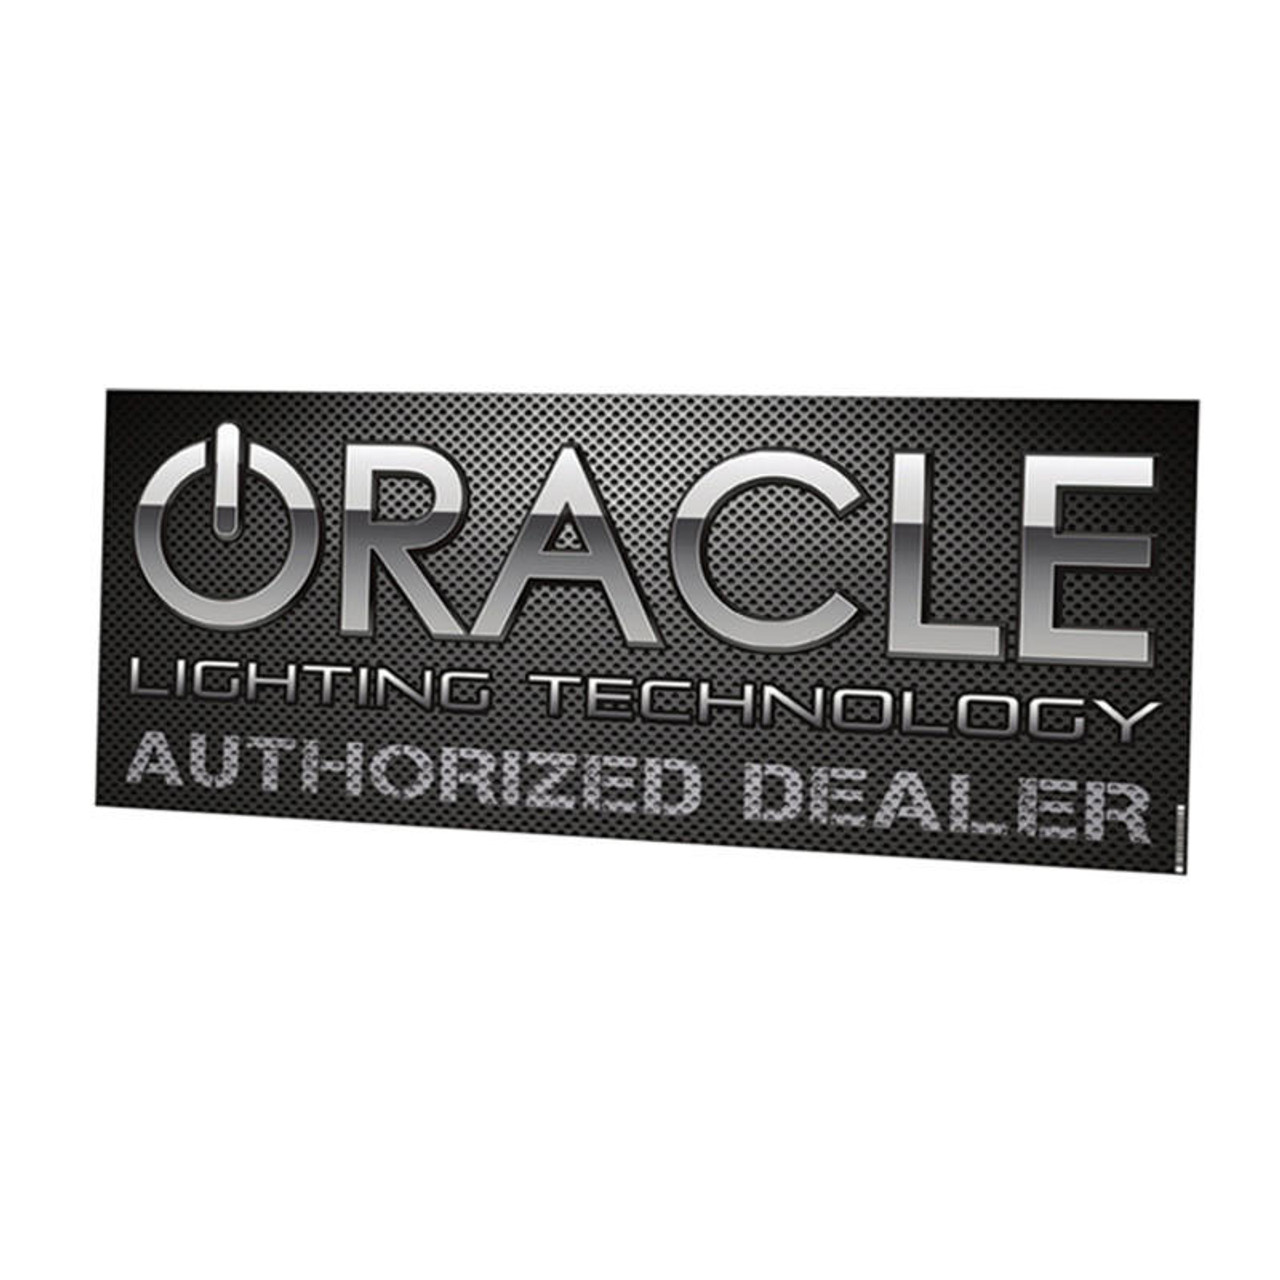 ORACLE Lighting Oracle - 3ft x 1.6ft Banner - 8039-504 